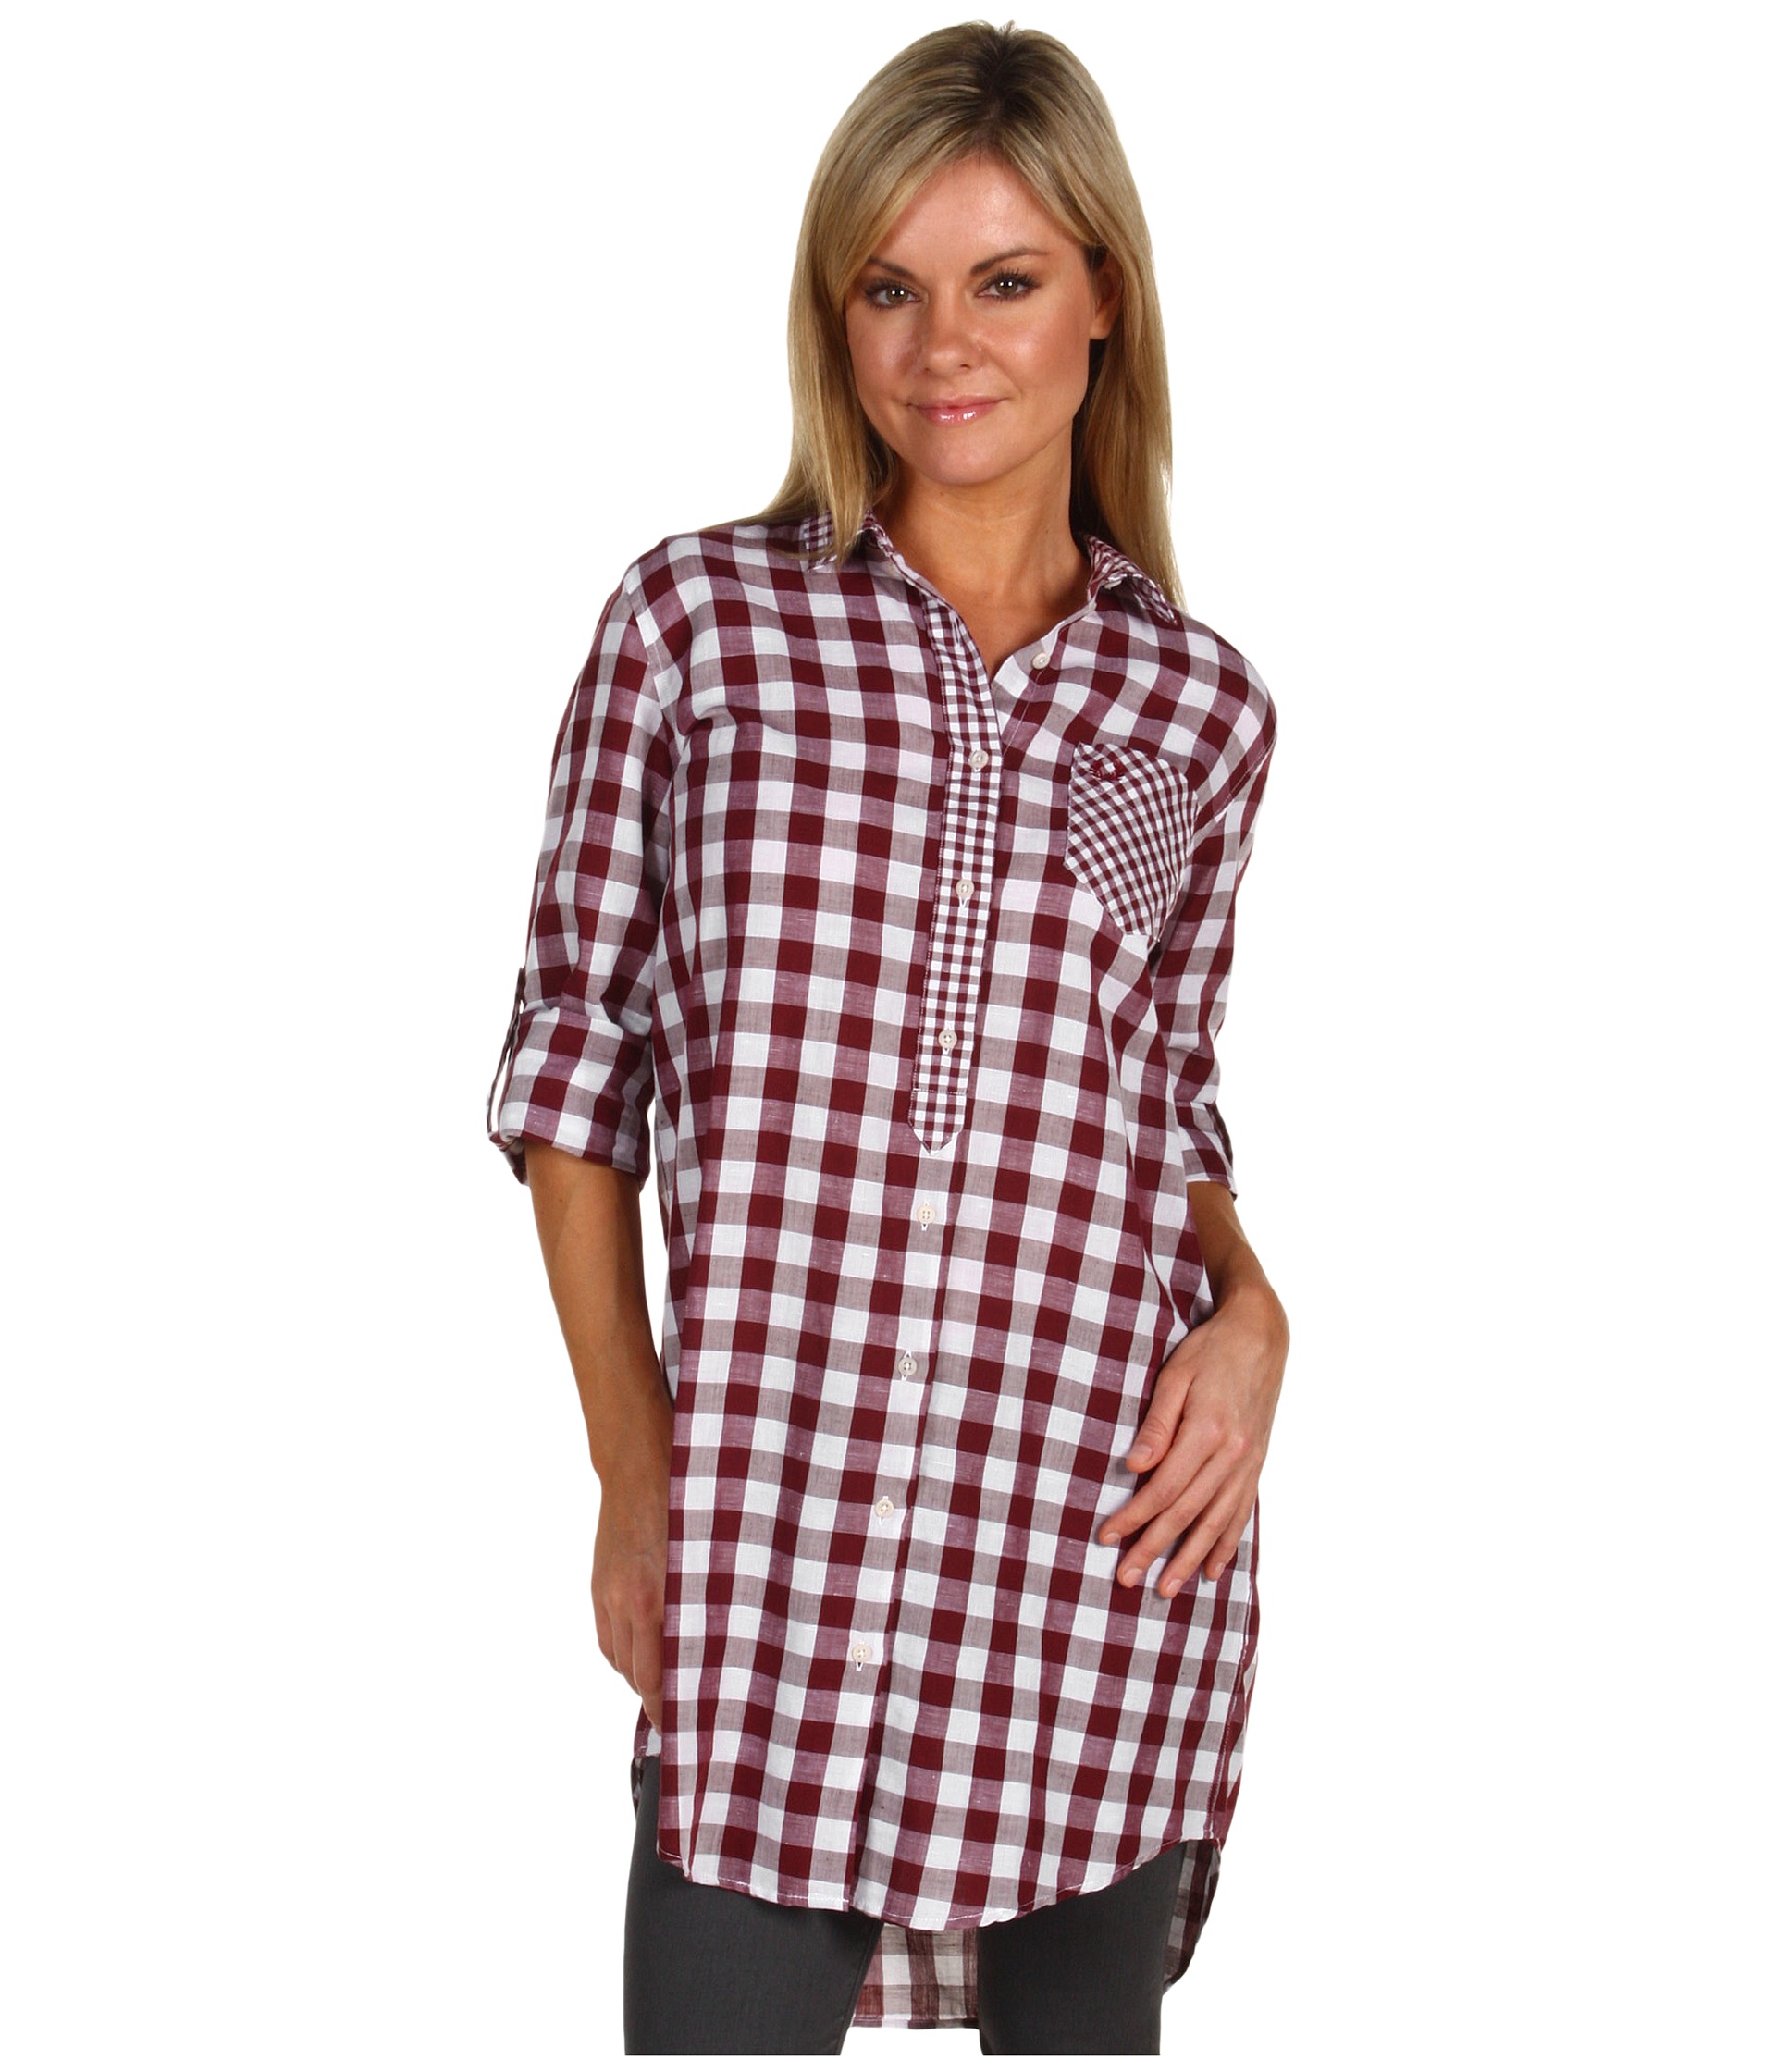 Fred Perry Gingham Boyfriend Shirt $46.99 (  MSRP $135.00)